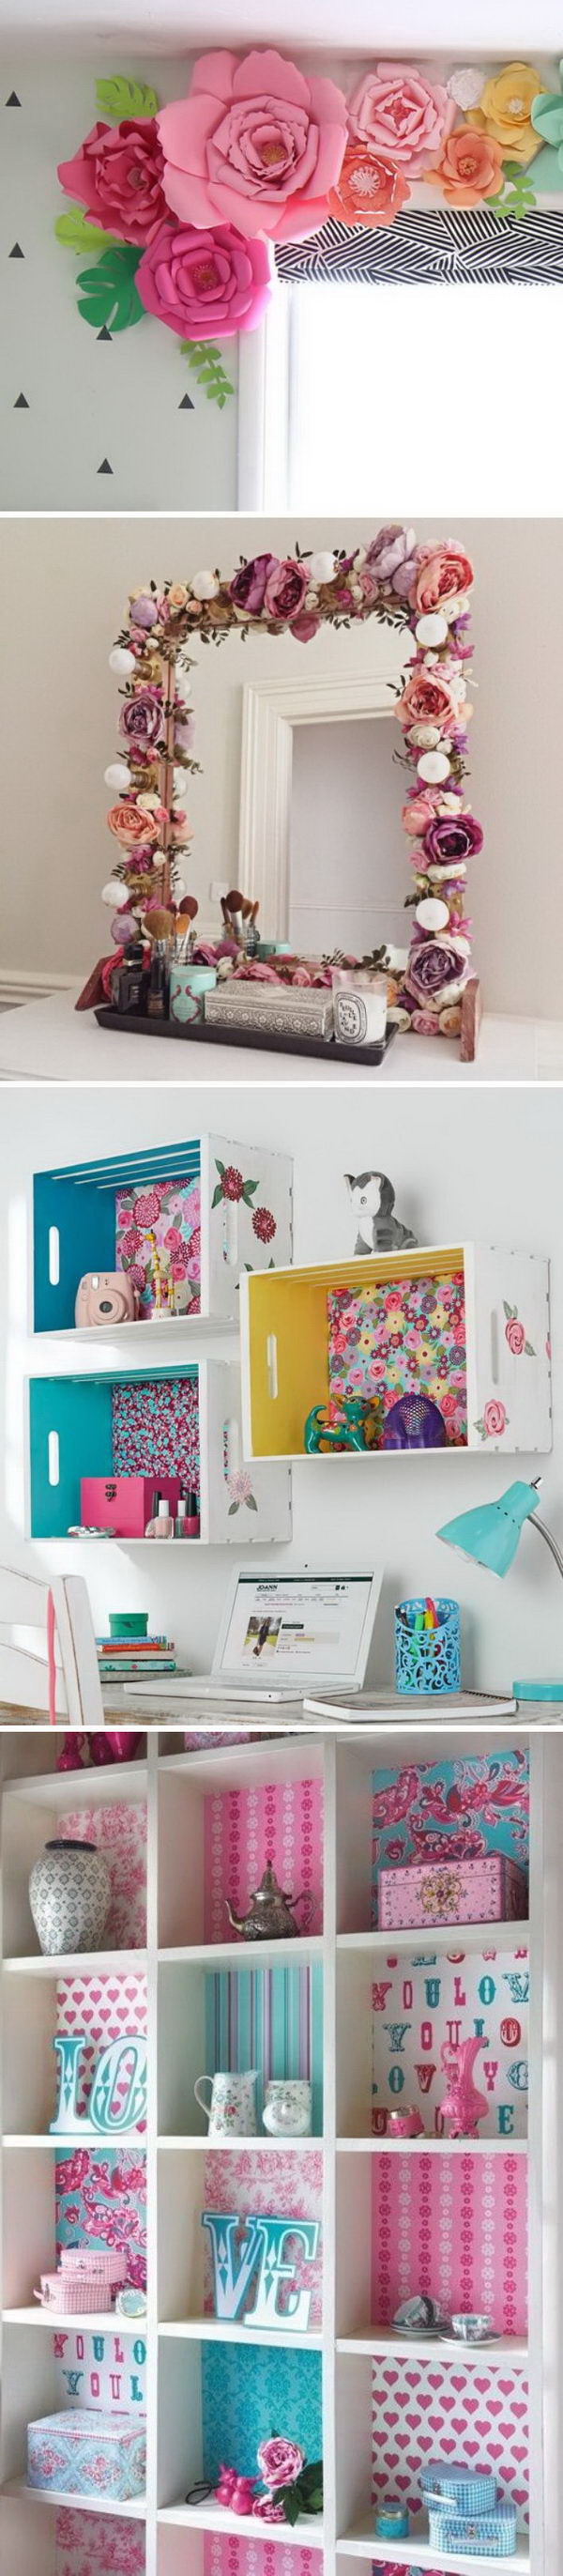 Awesome DIY Projects To Decorate A Girl's Bedroom. 